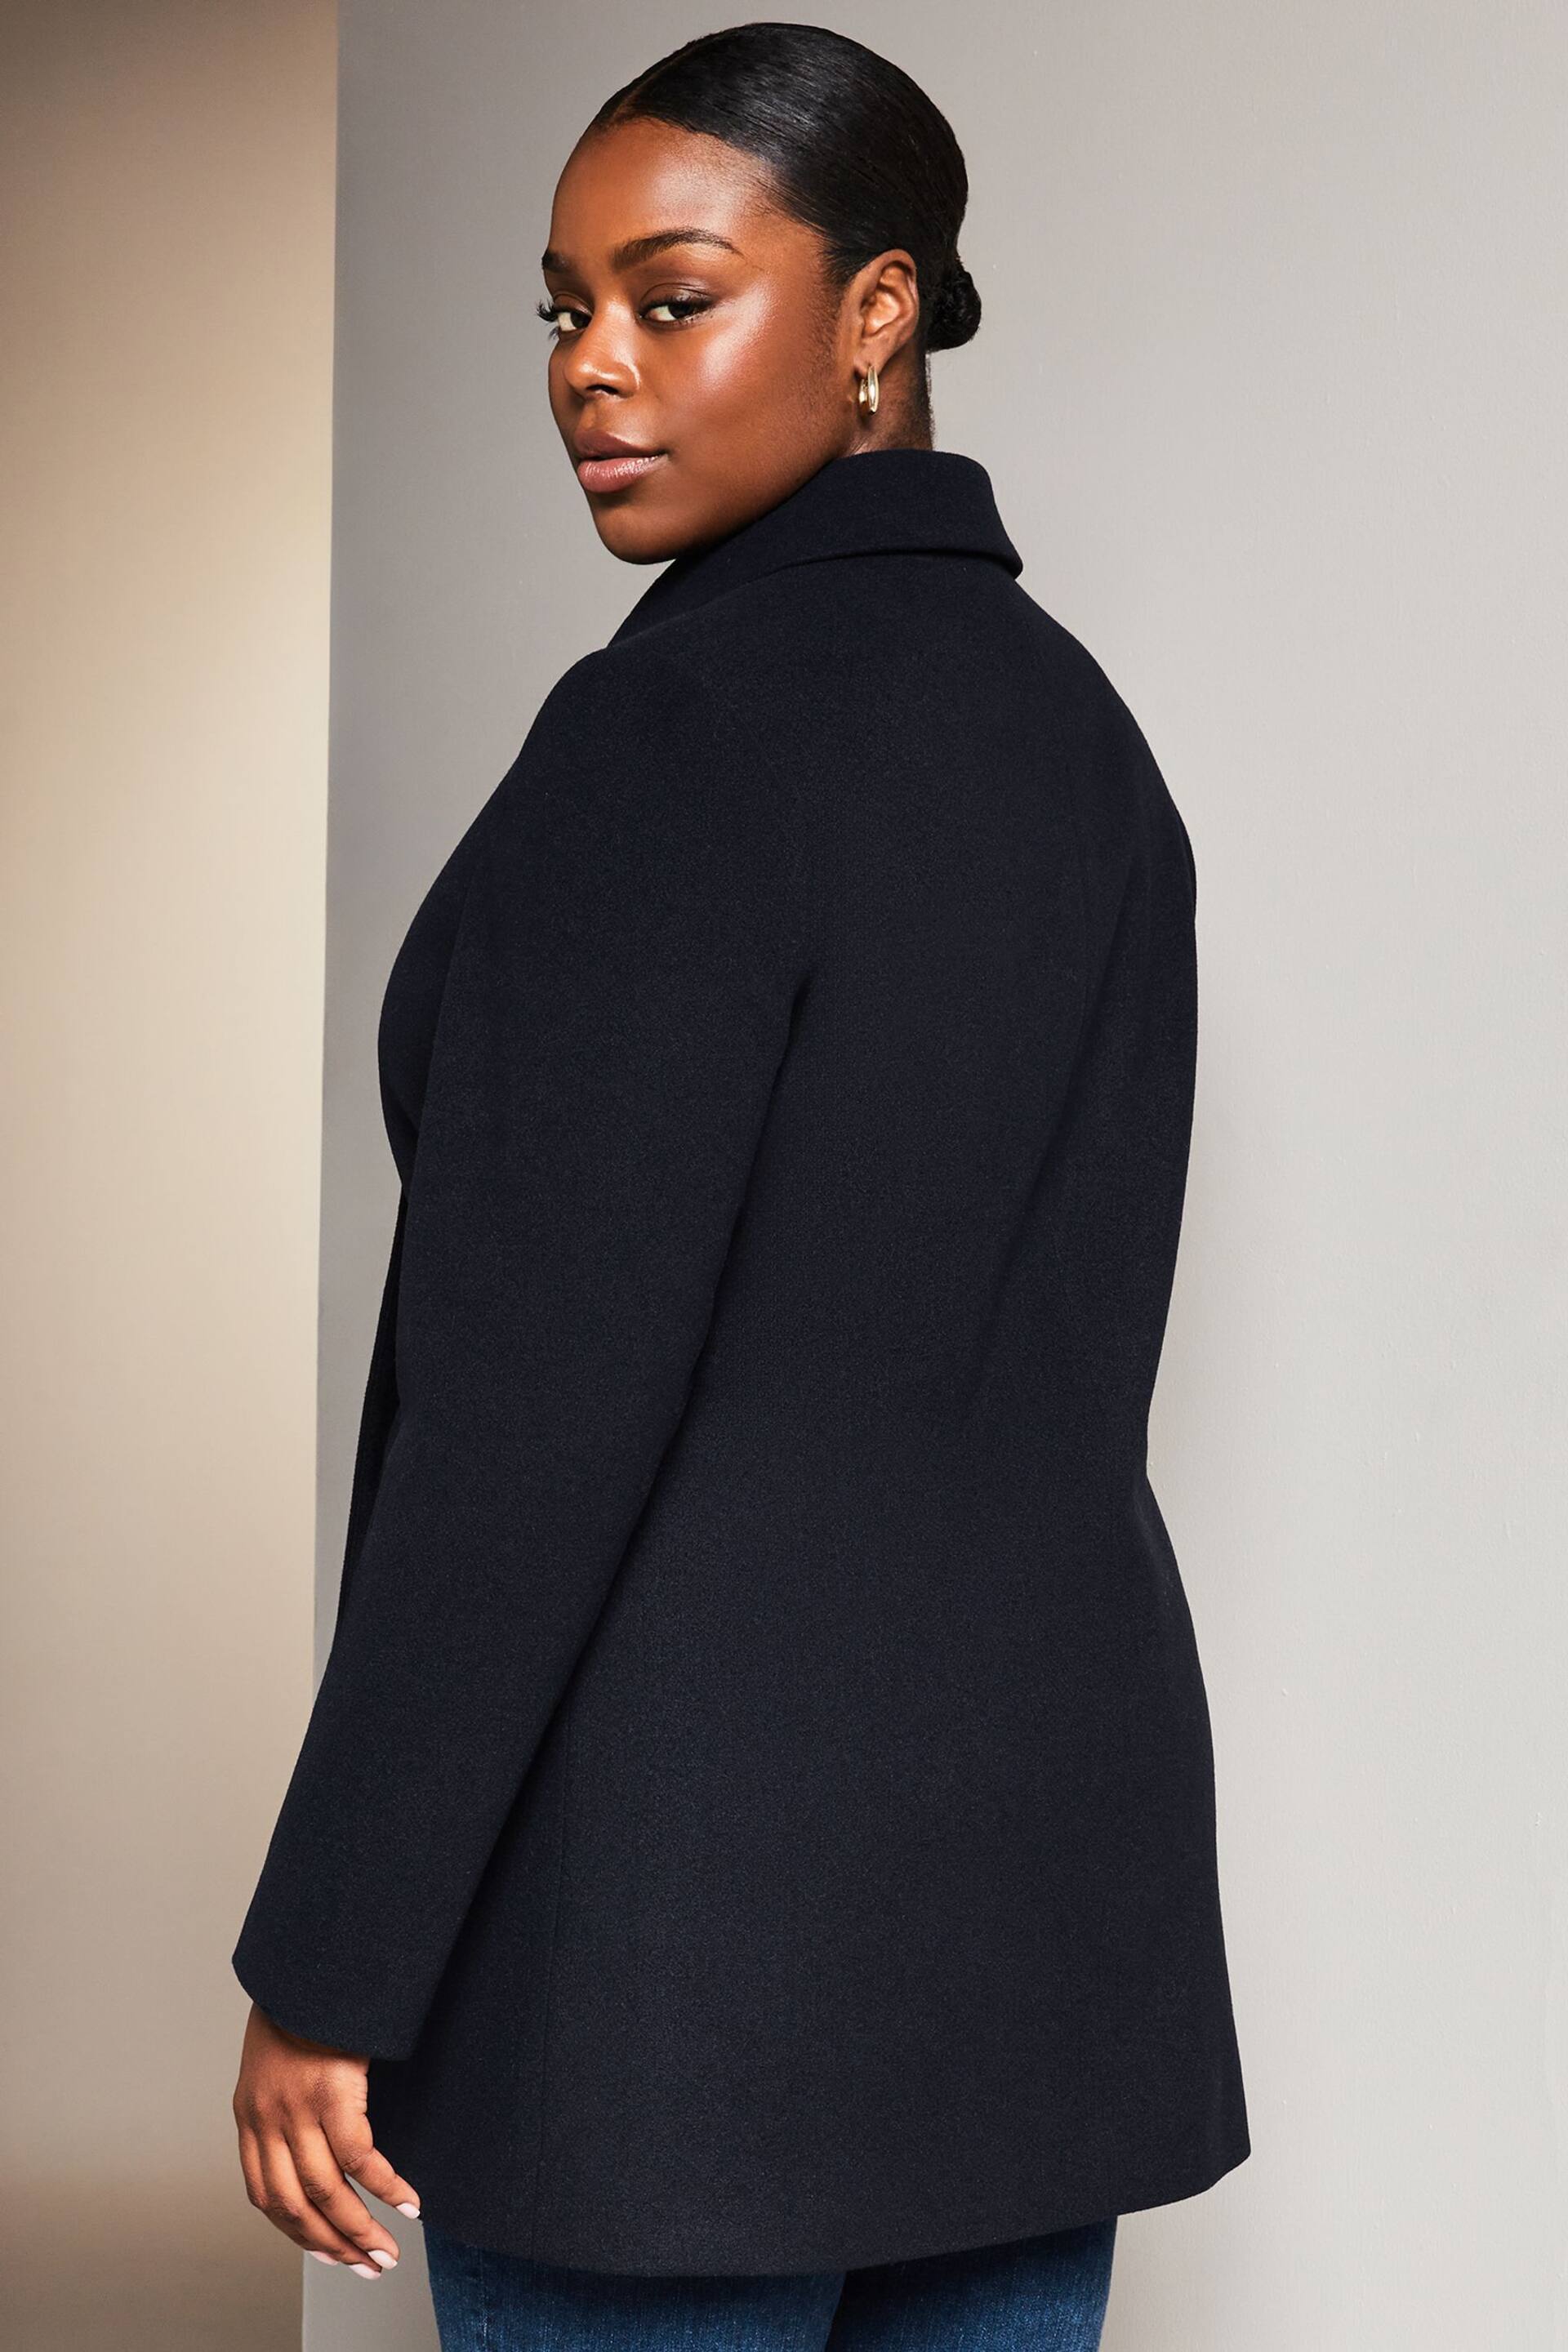 Lipsy Navy Blue Curve Hammered Button Dolly Coat - Image 2 of 4